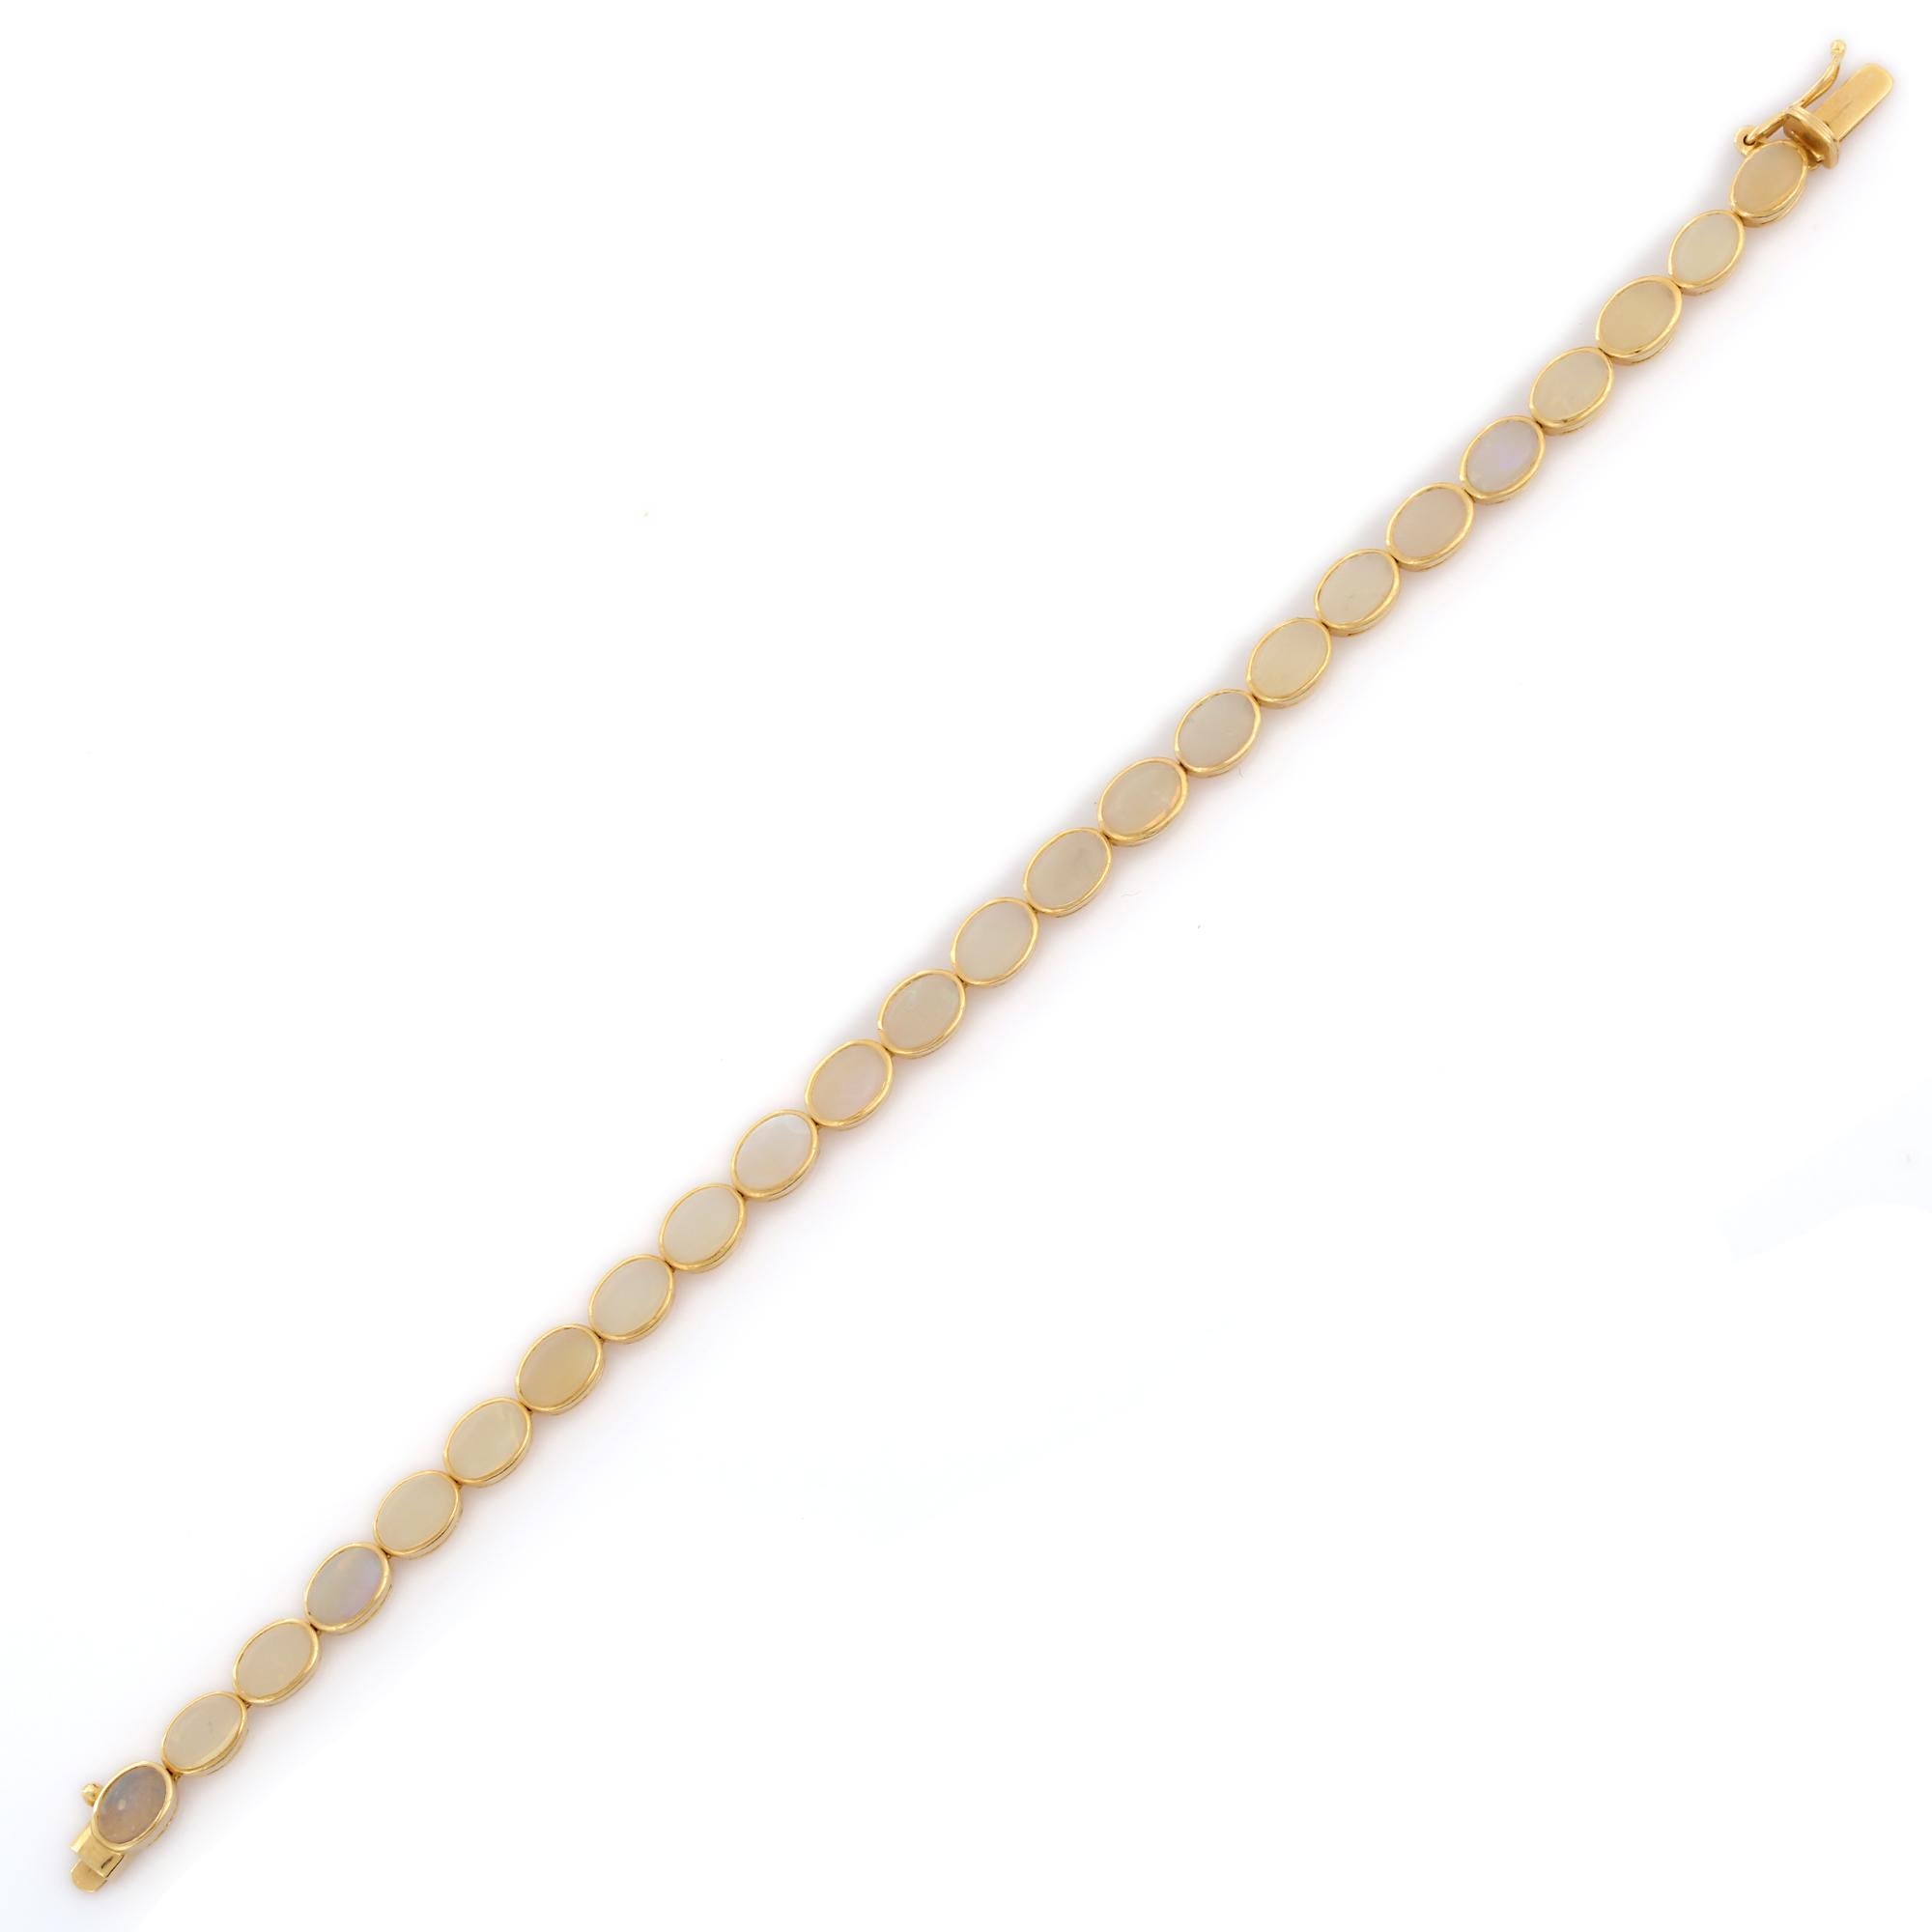 This Handcrafted Bezel Set Oval Moonstone Tennis Bracelet in 18K gold showcases 7.45 carats endlessly sparkling natural rainbow moonstone. It measures 7 inches long in length. 
Rainbow moonstone can help you attract the right people into your life